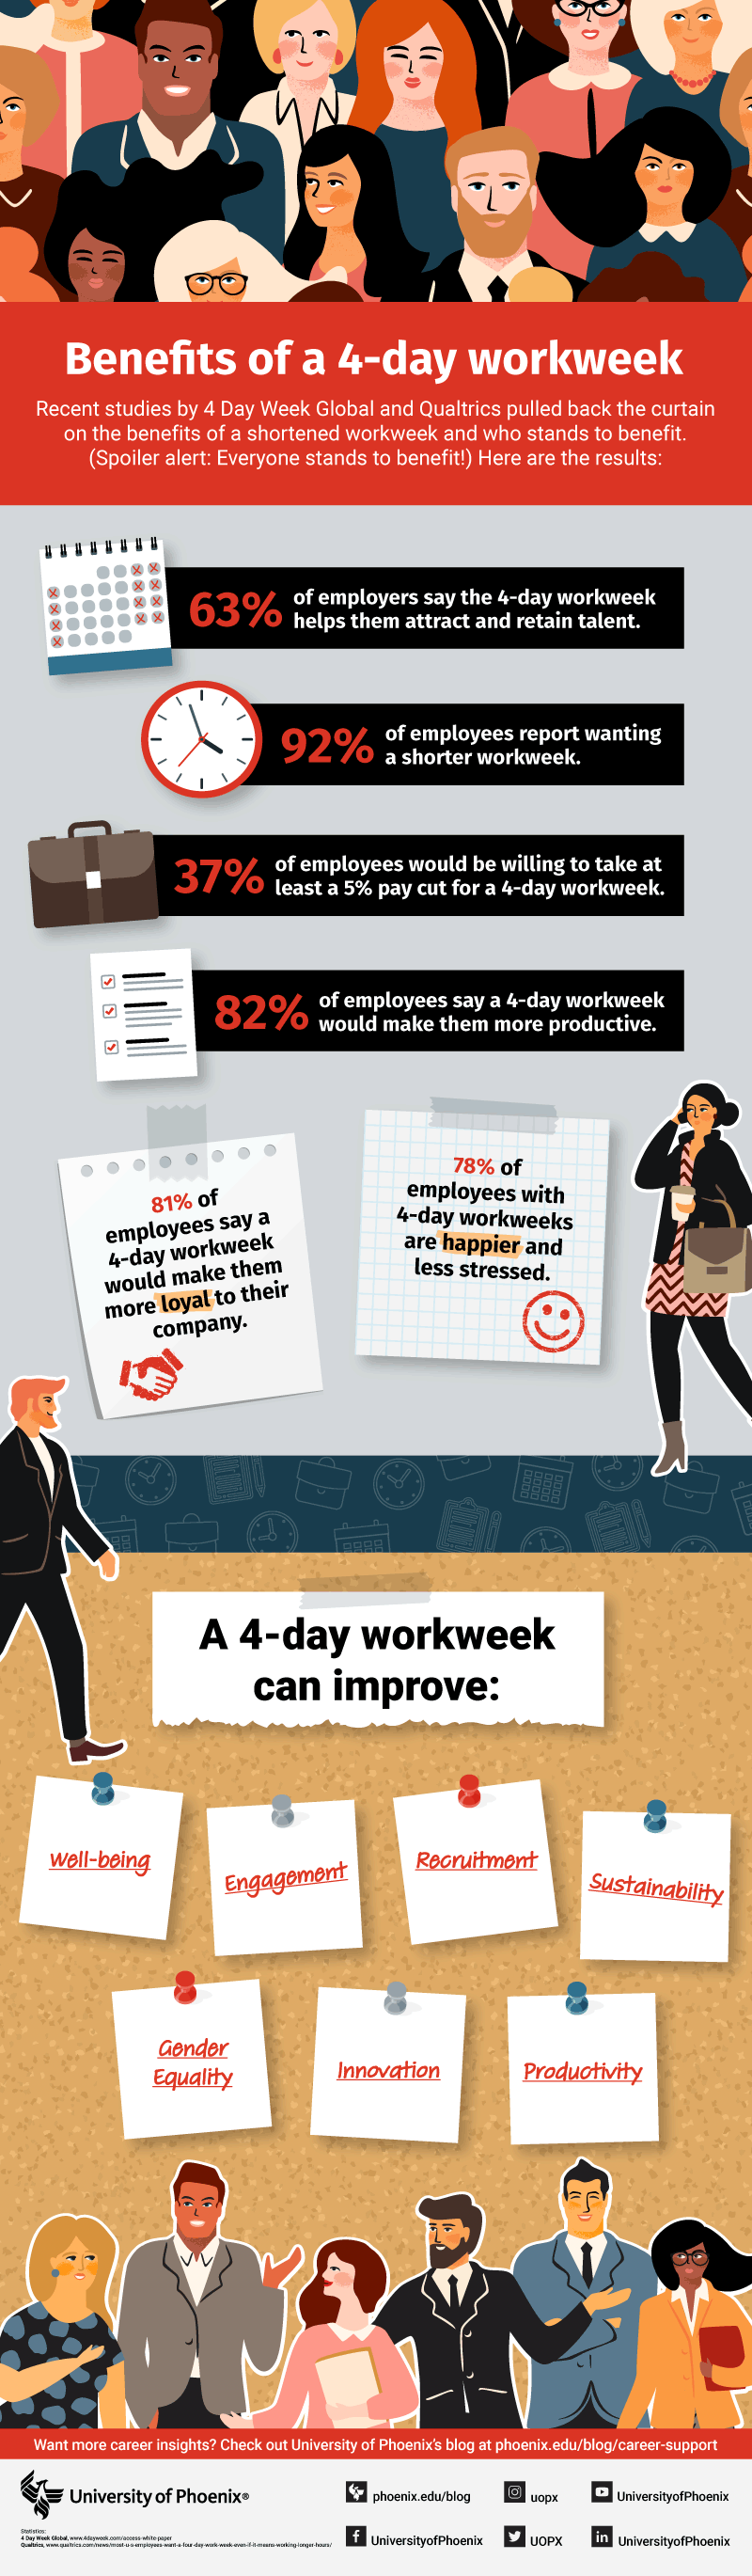 Benefits of a 4-day workweek infographic